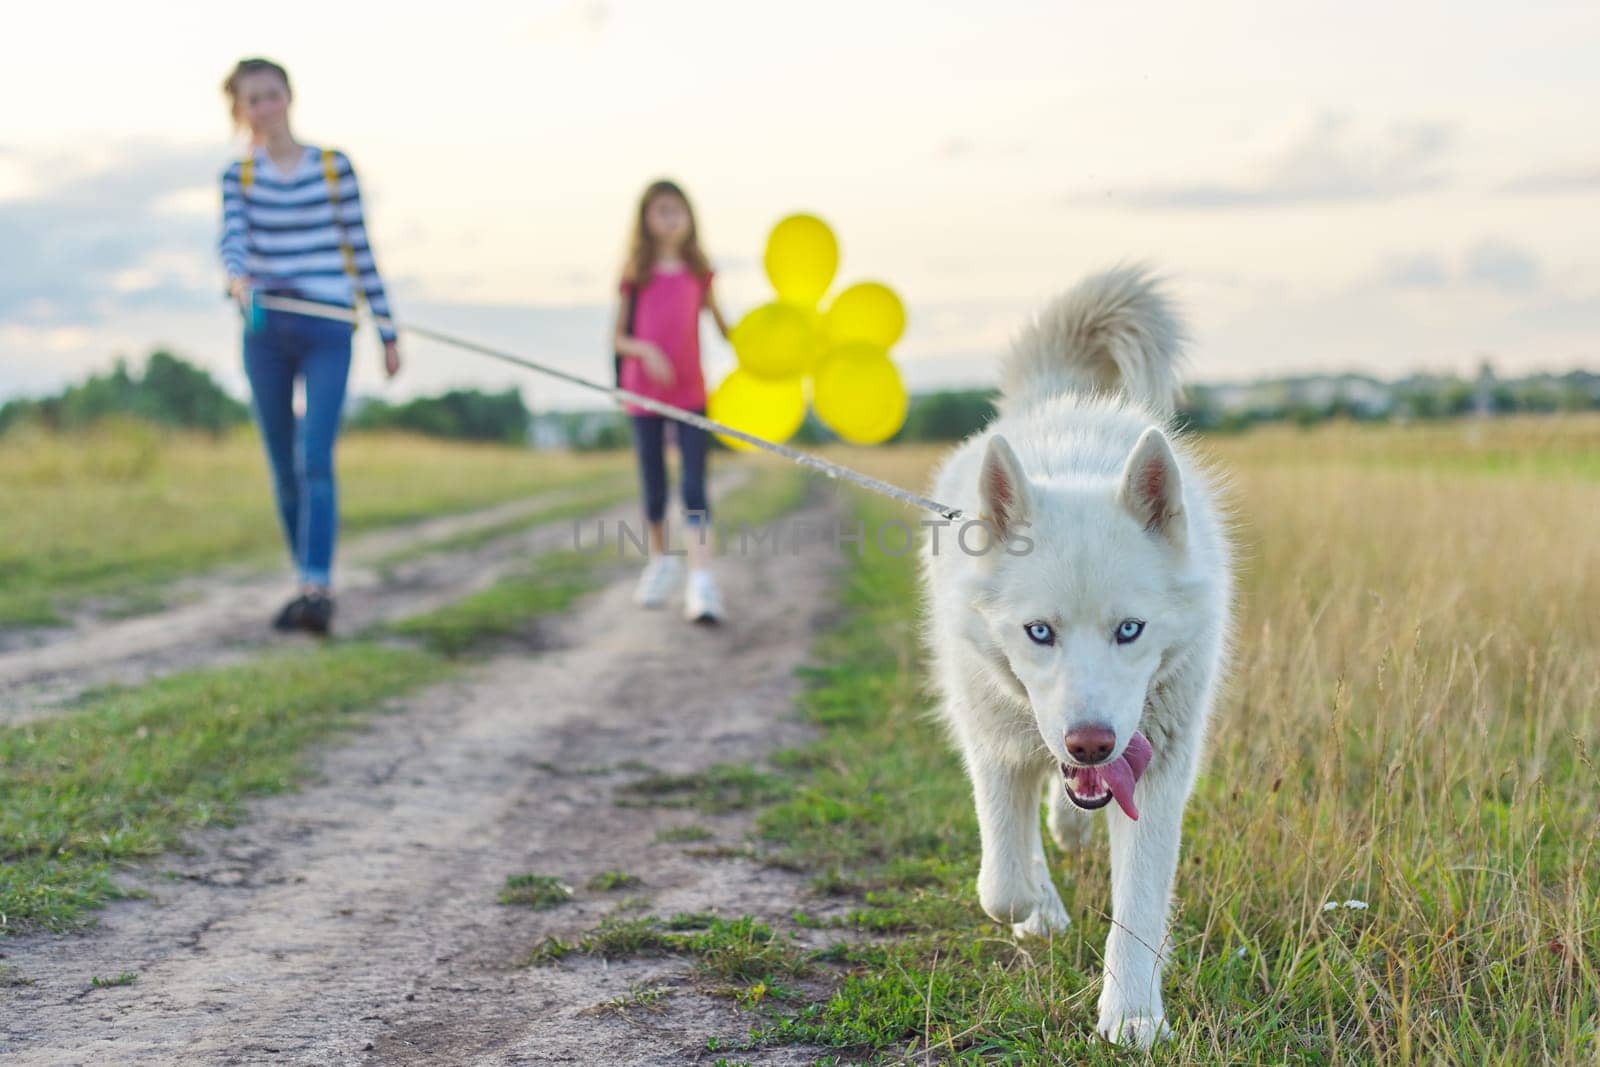 Children walking with dog in nature, girls with pet on country road on sunny summer day, child with yellow balloons